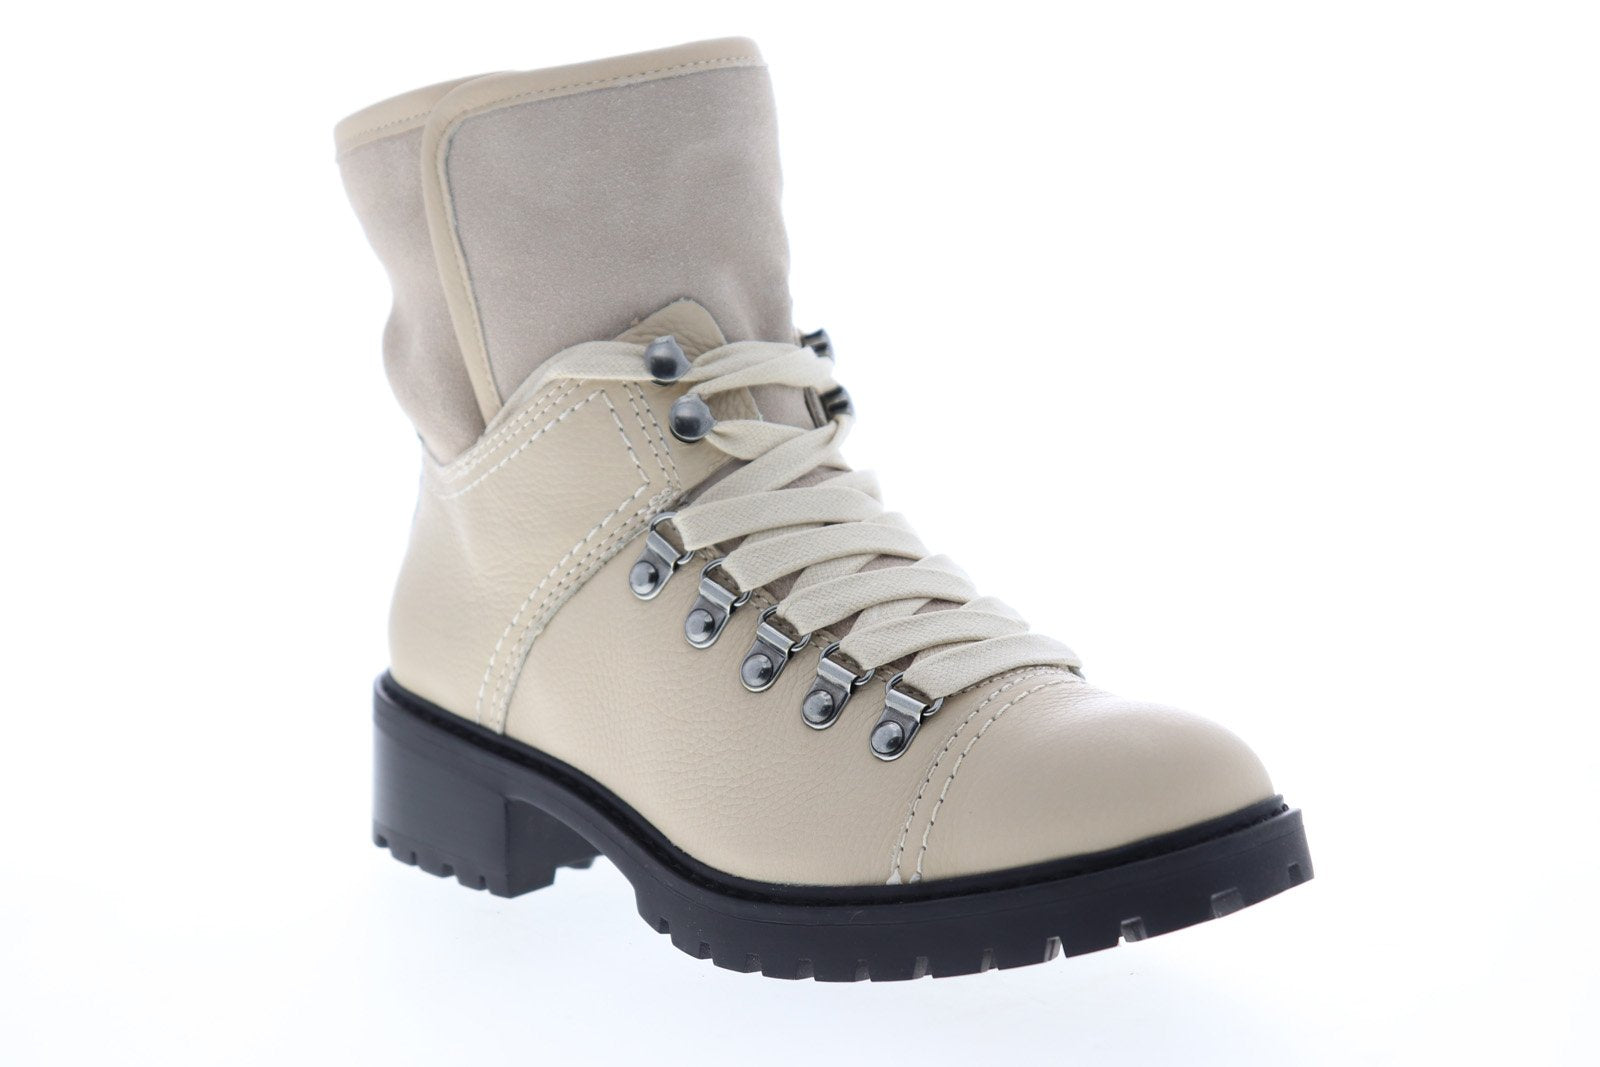 lace up hiker boots women's